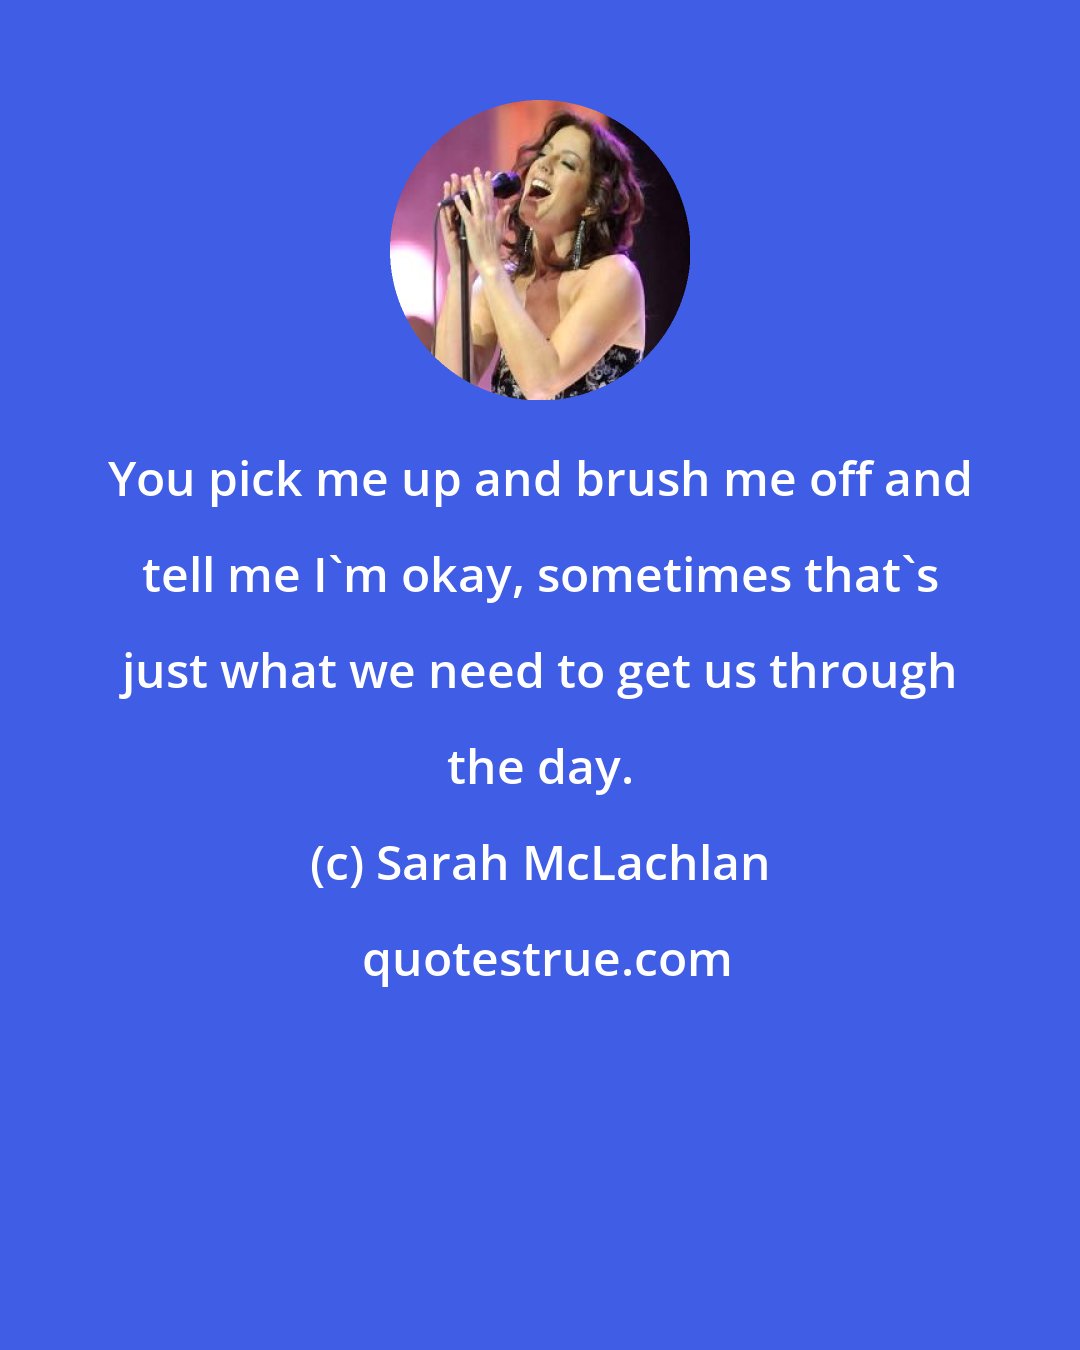 Sarah McLachlan: You pick me up and brush me off and tell me I'm okay, sometimes that's just what we need to get us through the day.